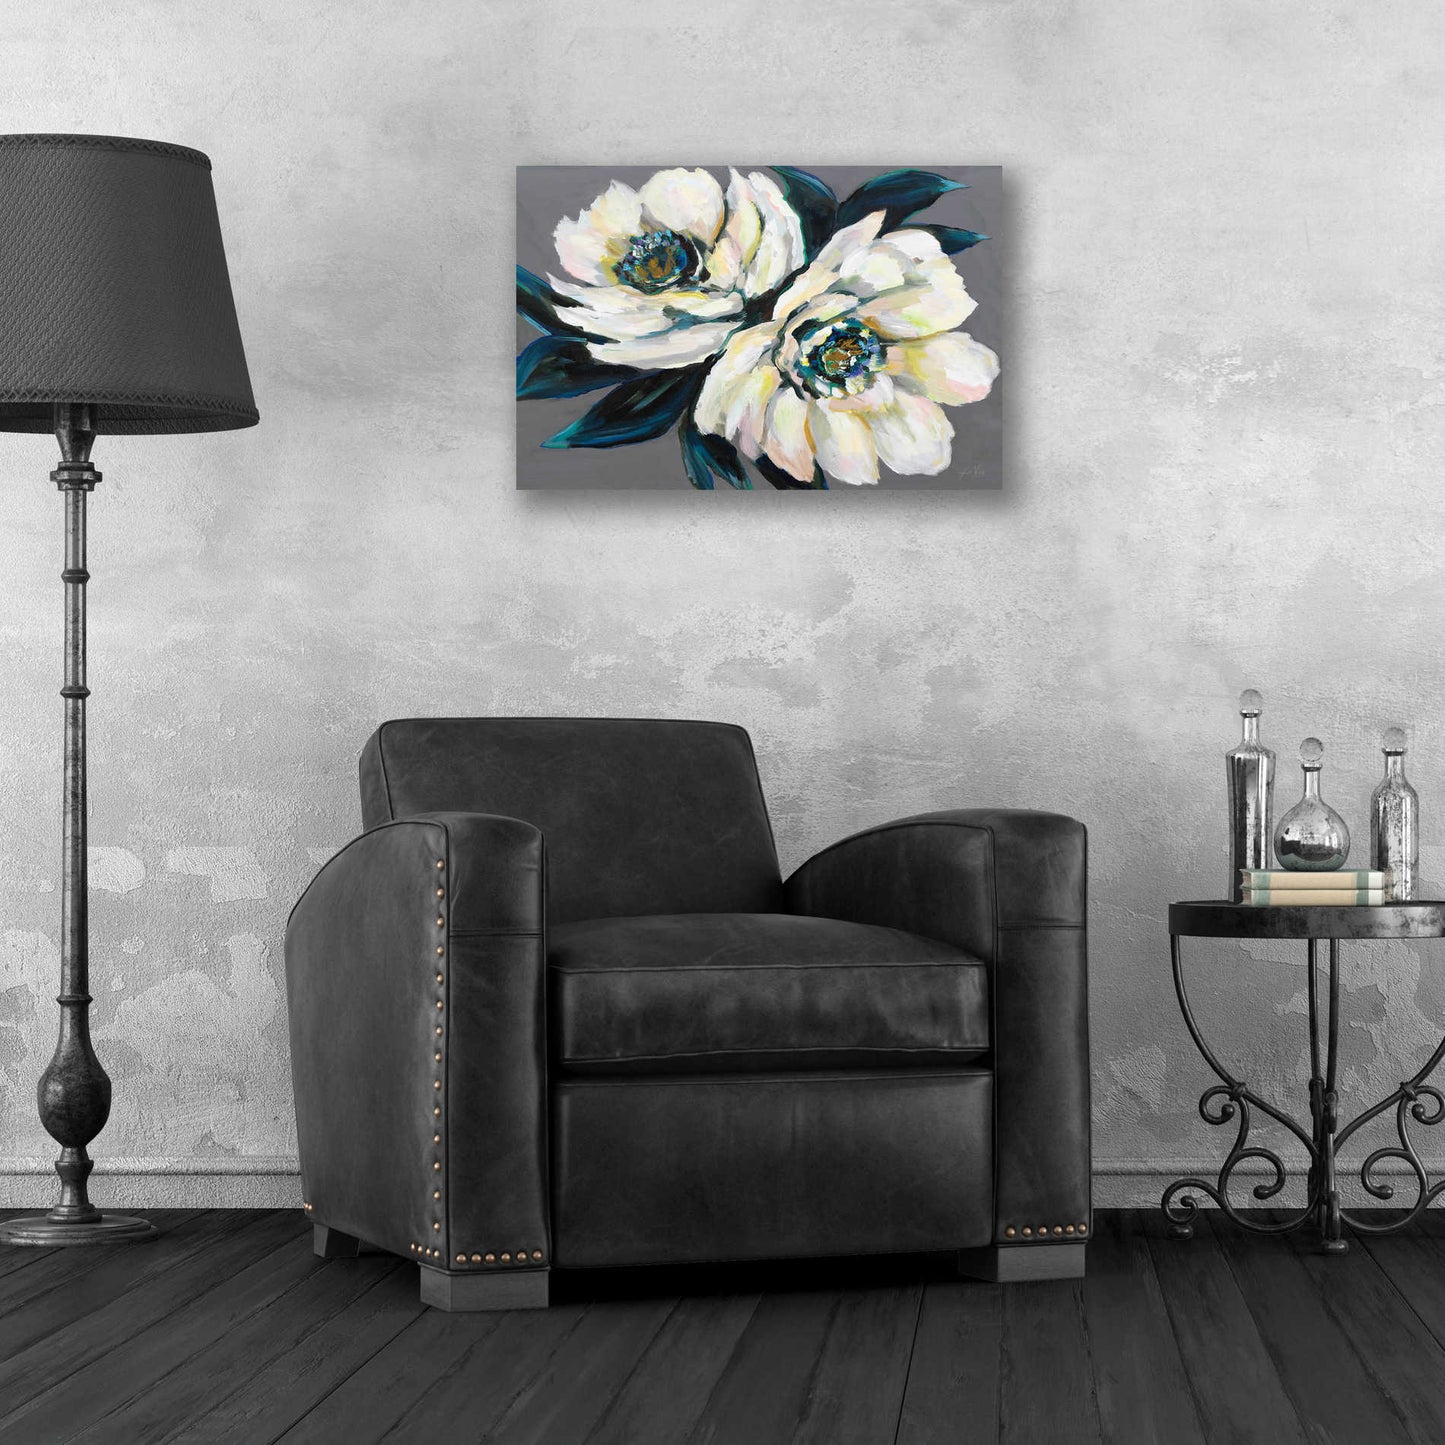 Epic Art 'Peonies' by Jeanette Vertentes, Acrylic Glass Wall Art,24x16